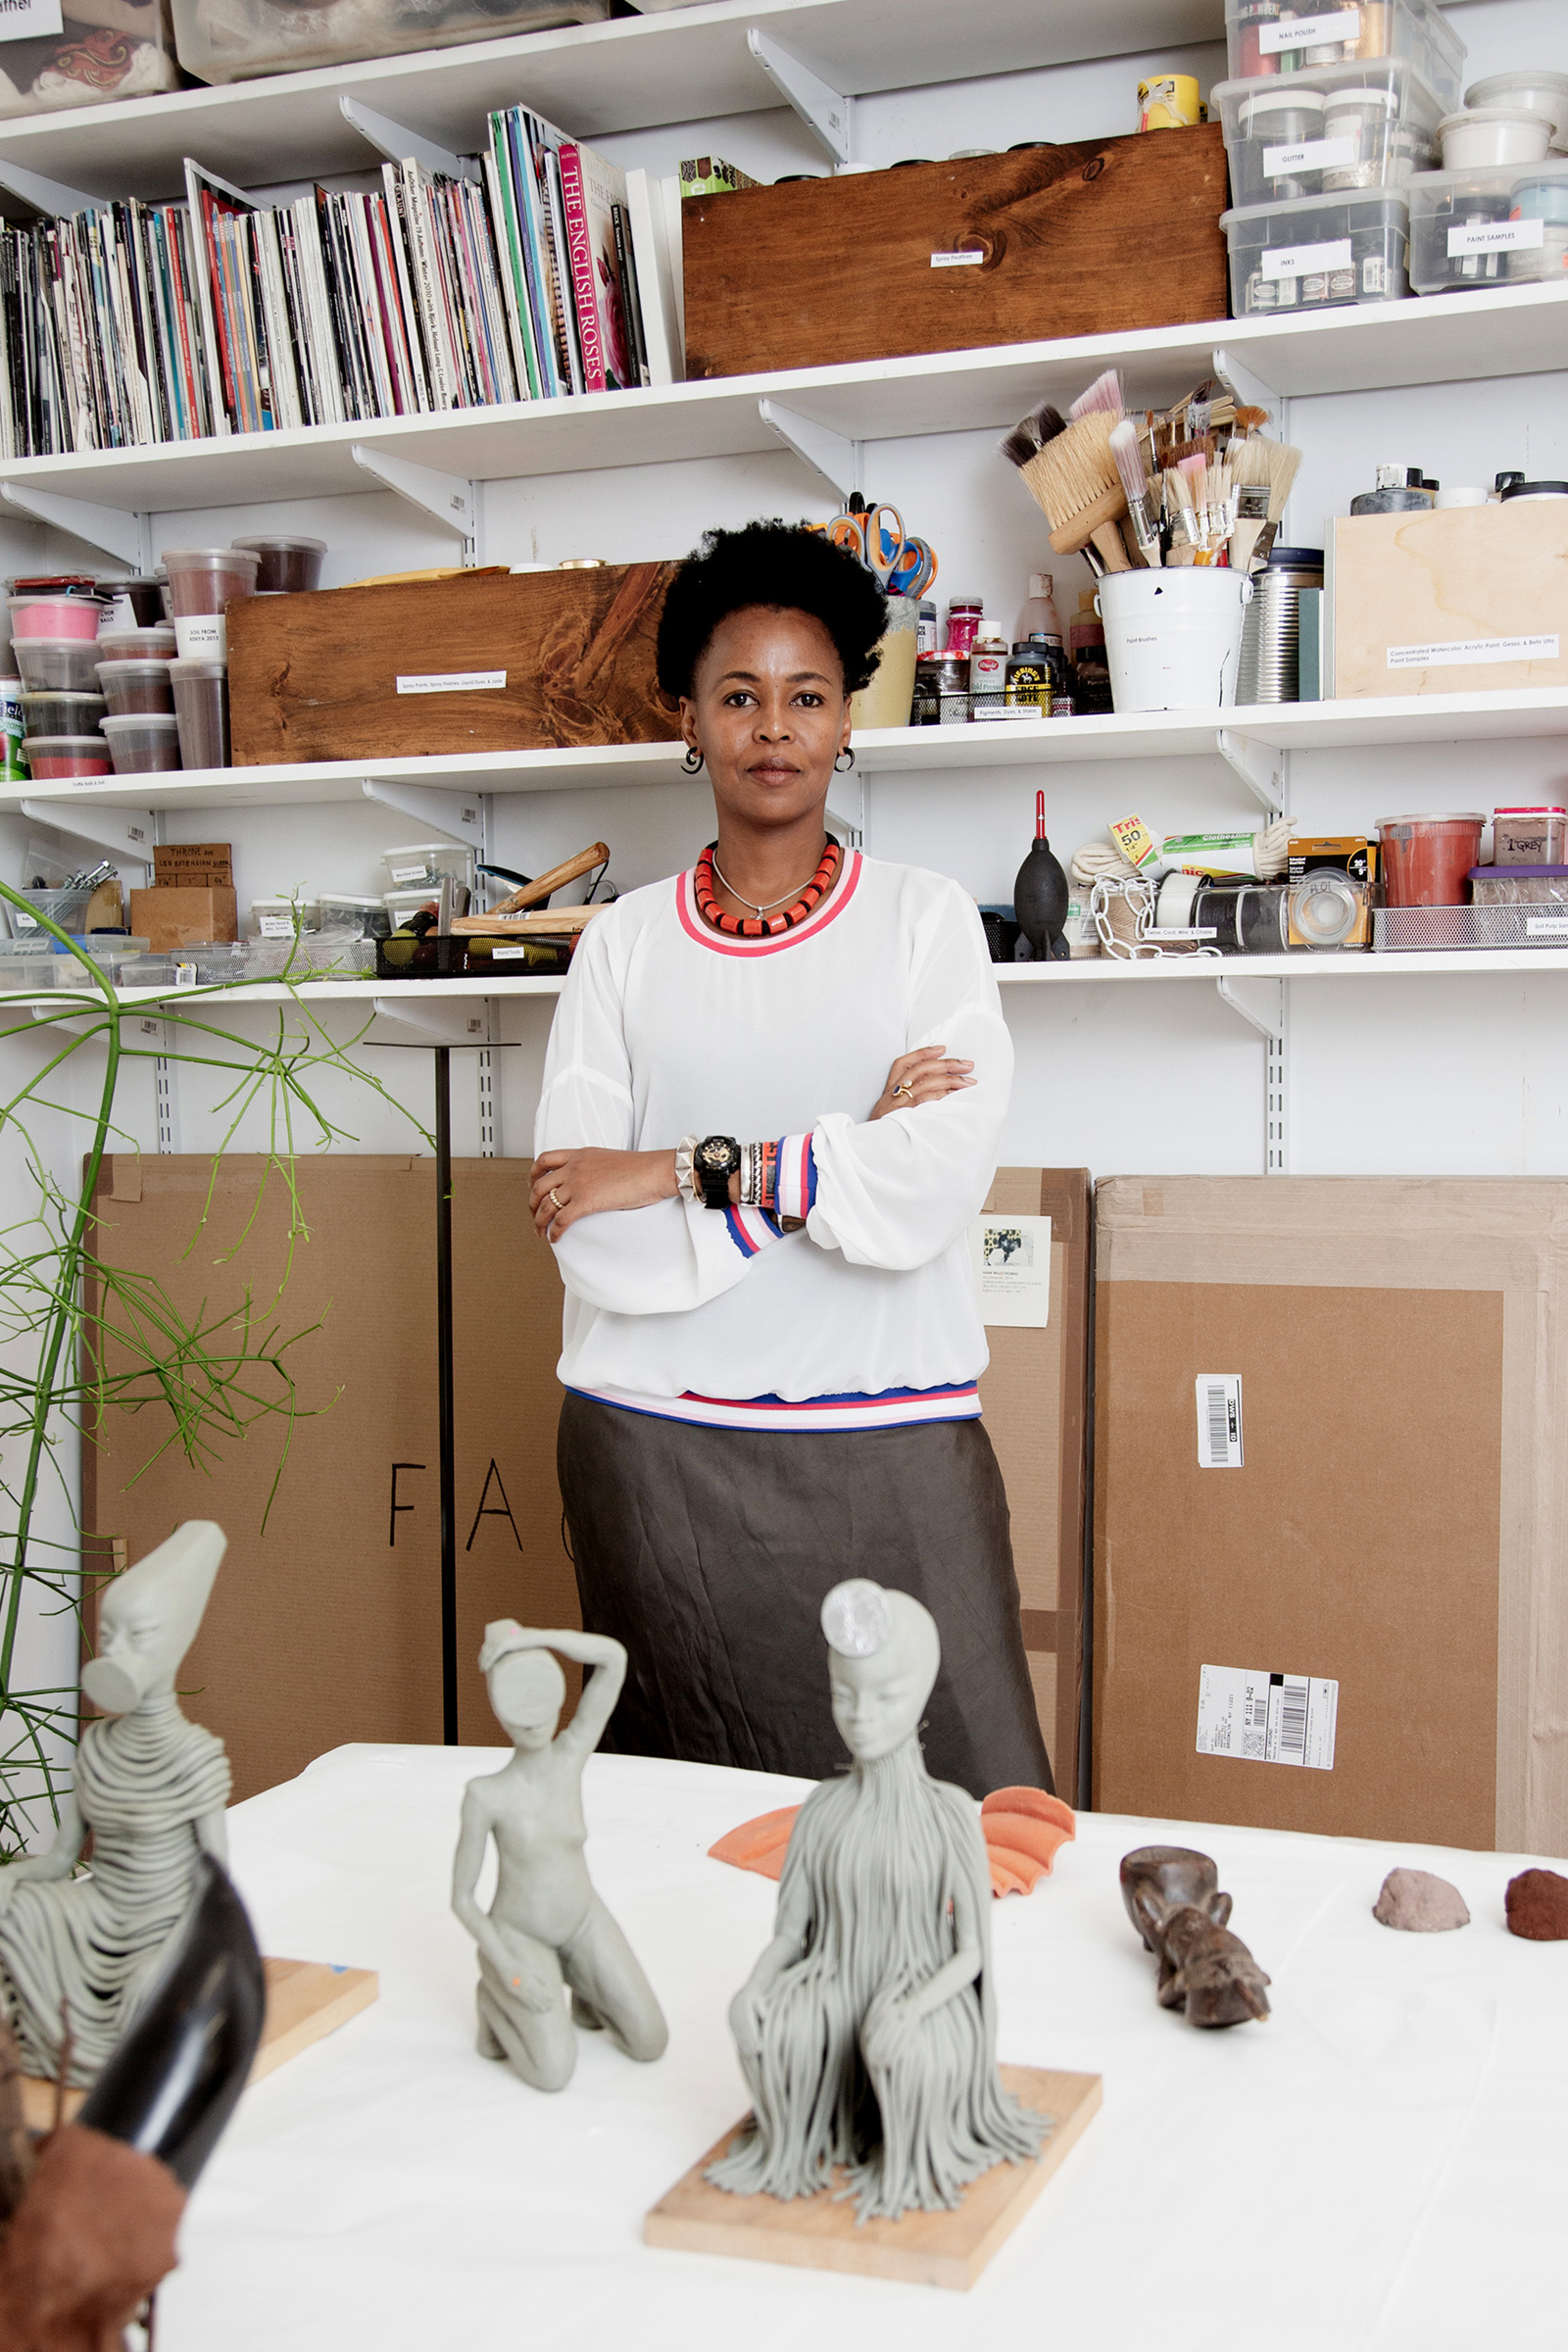 Artist Wangechi Mutu in her Brooklyn studio with models for her sculptures that were installed outside the Metropolitan Museum of Art in New York, Sept. 26, 2019.